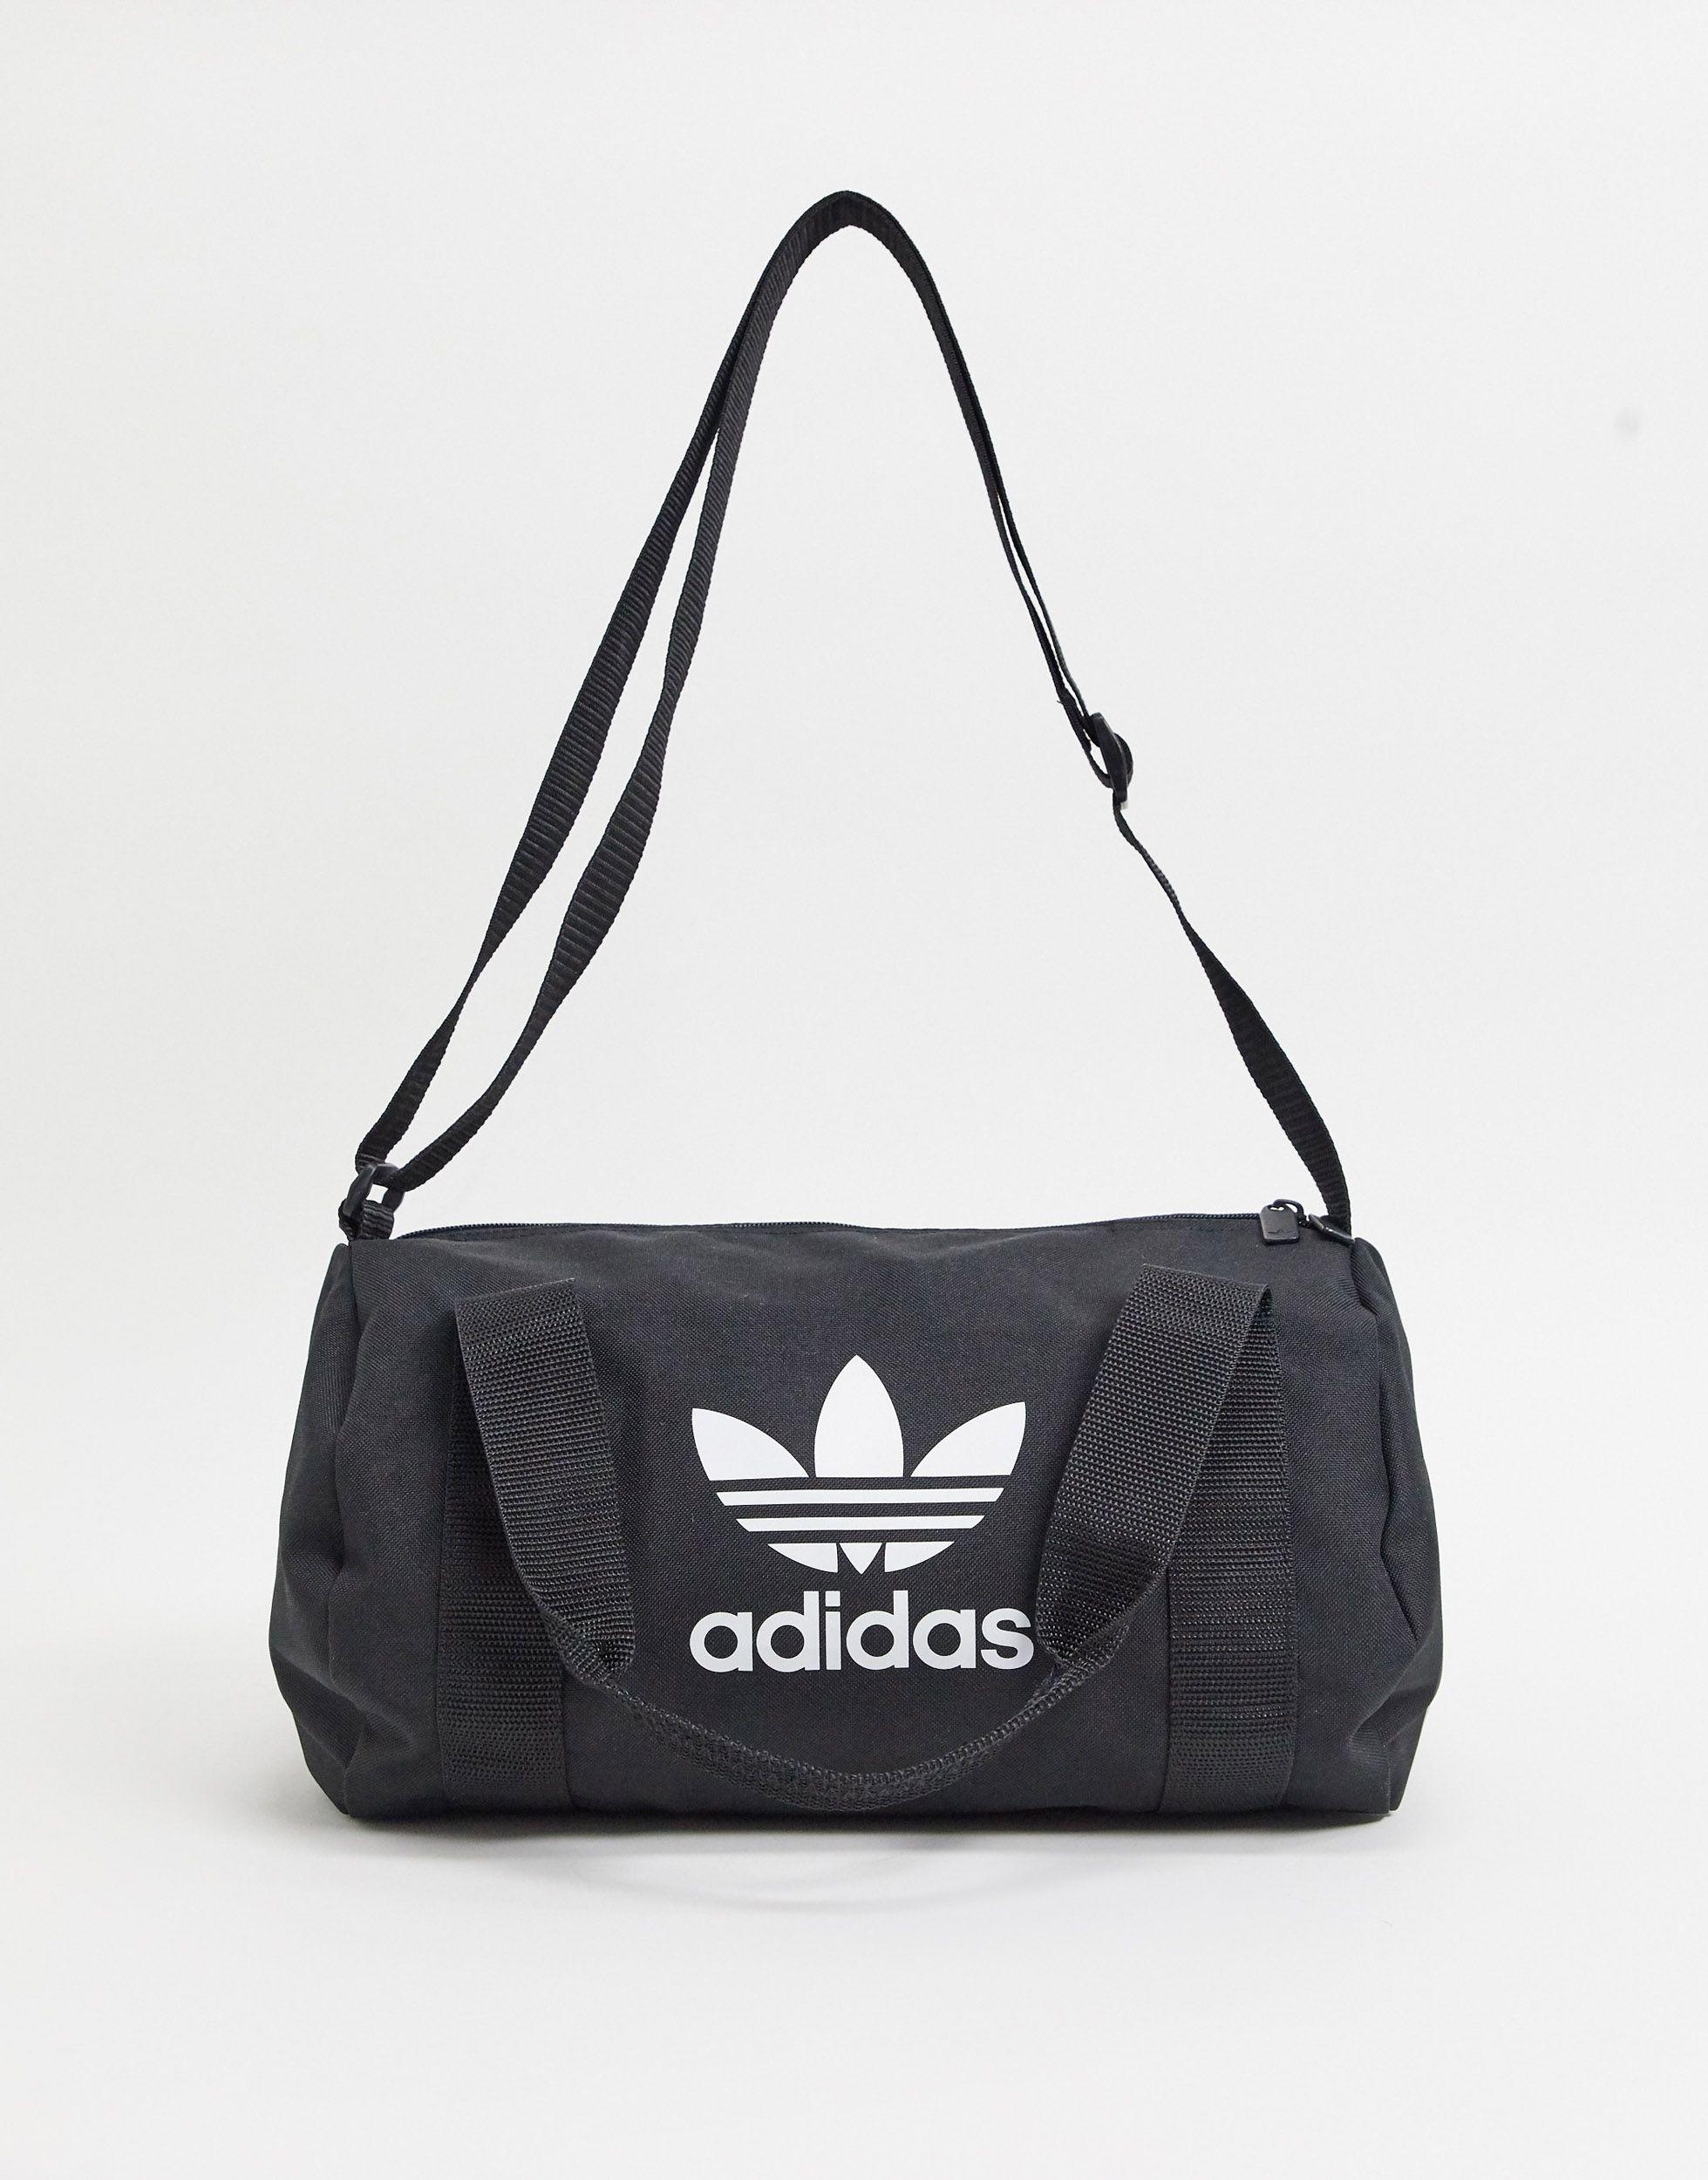 Adidas Trefoil Duffle Bag Norway, SAVE 58% - aveclumiere.com